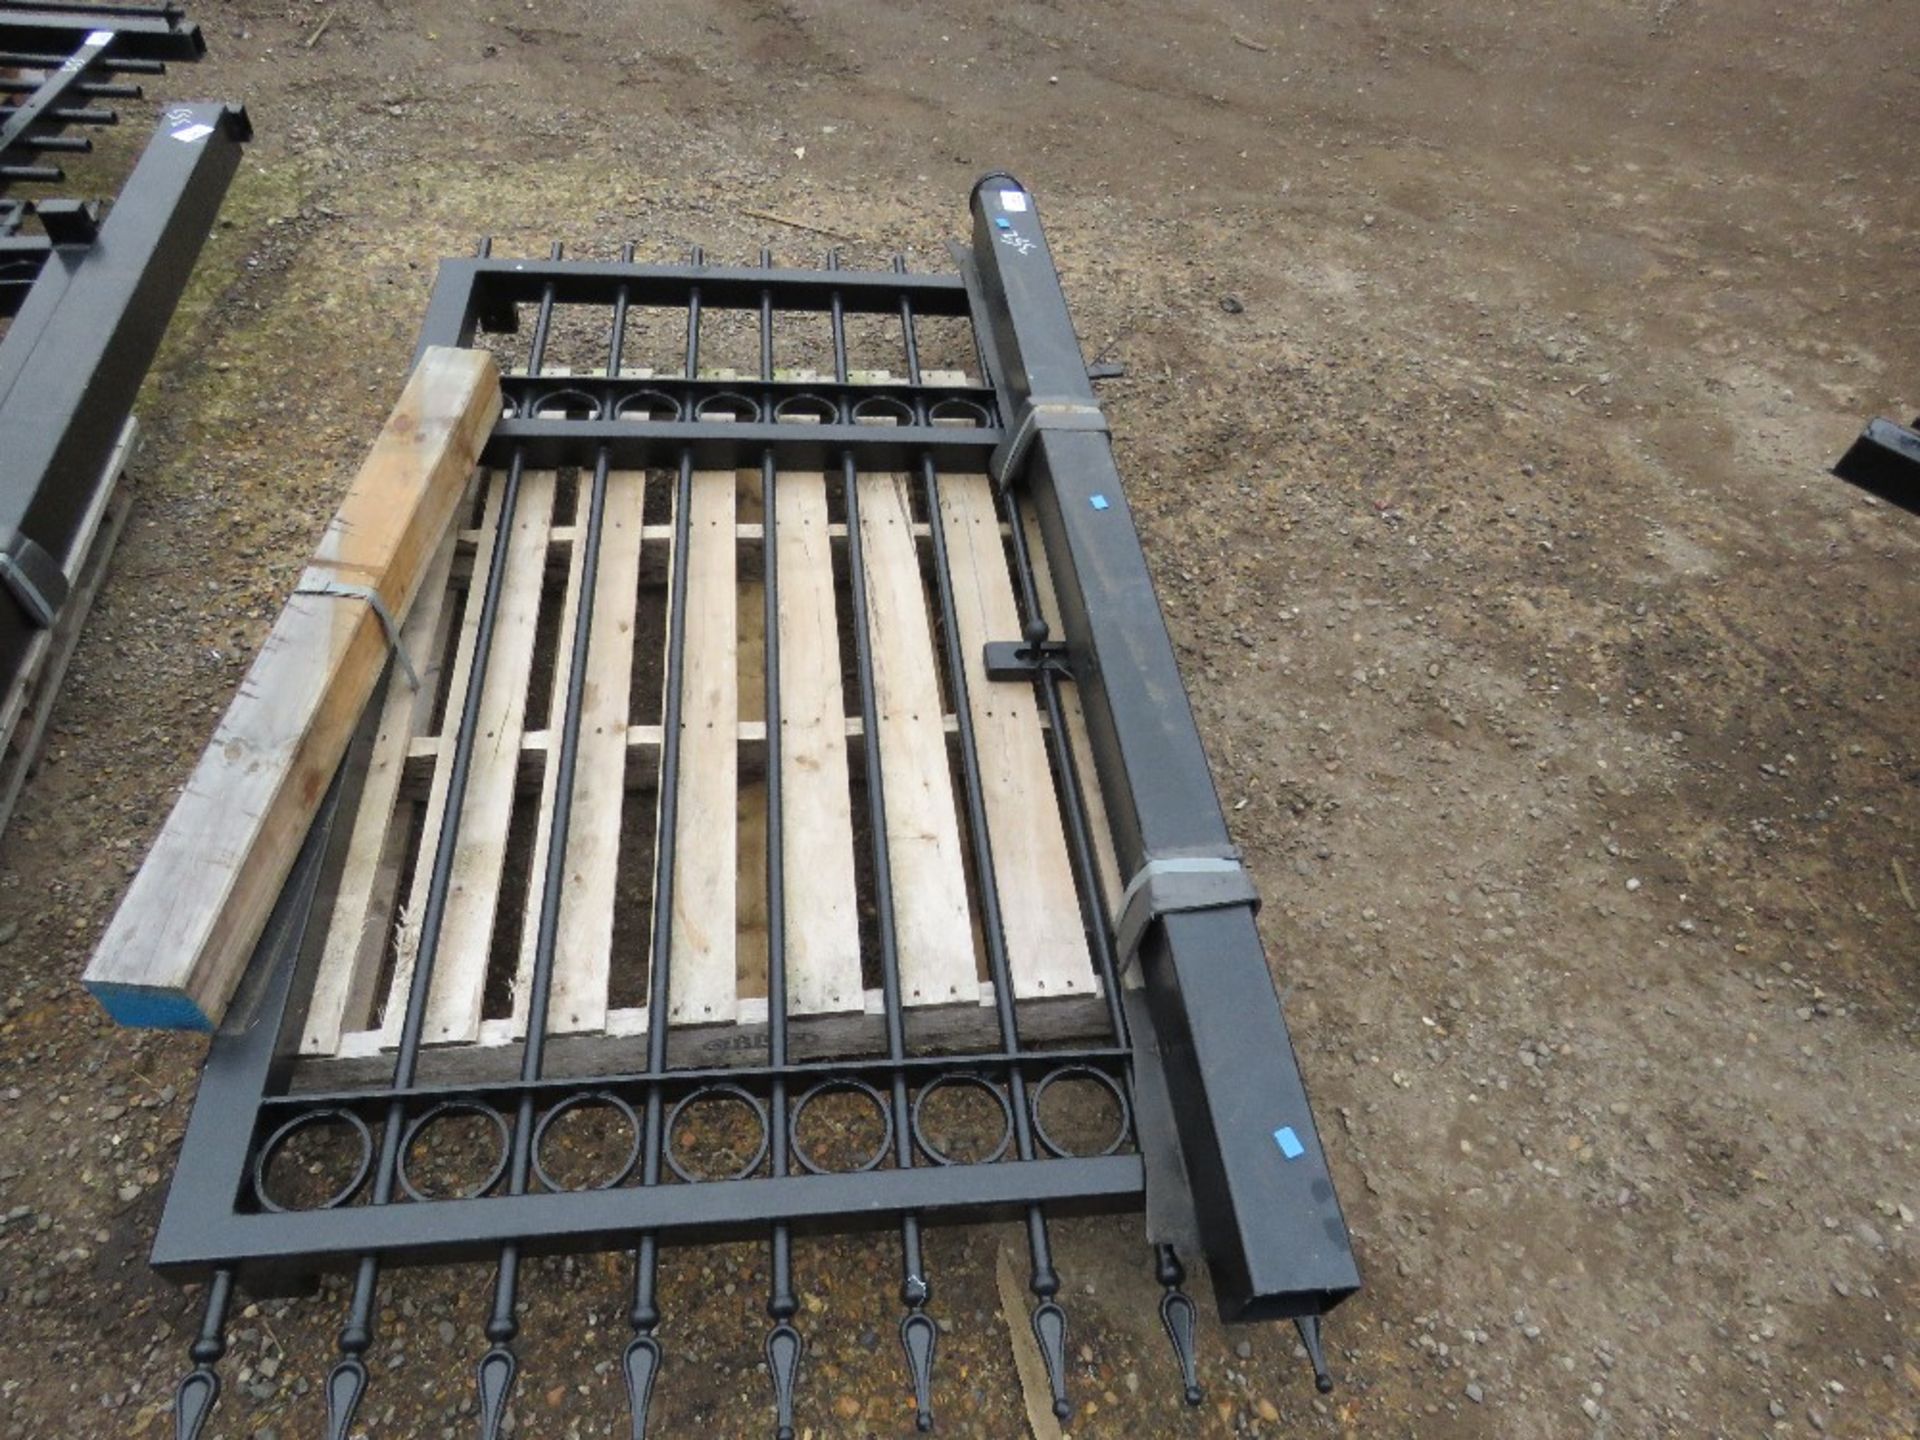 BLACK METAL ORNAMENTAL GATE WITH SLAM POST. SIZE: 2M HEIGHT X 1M WIDTH APPROX. PALLET C. - Image 3 of 3